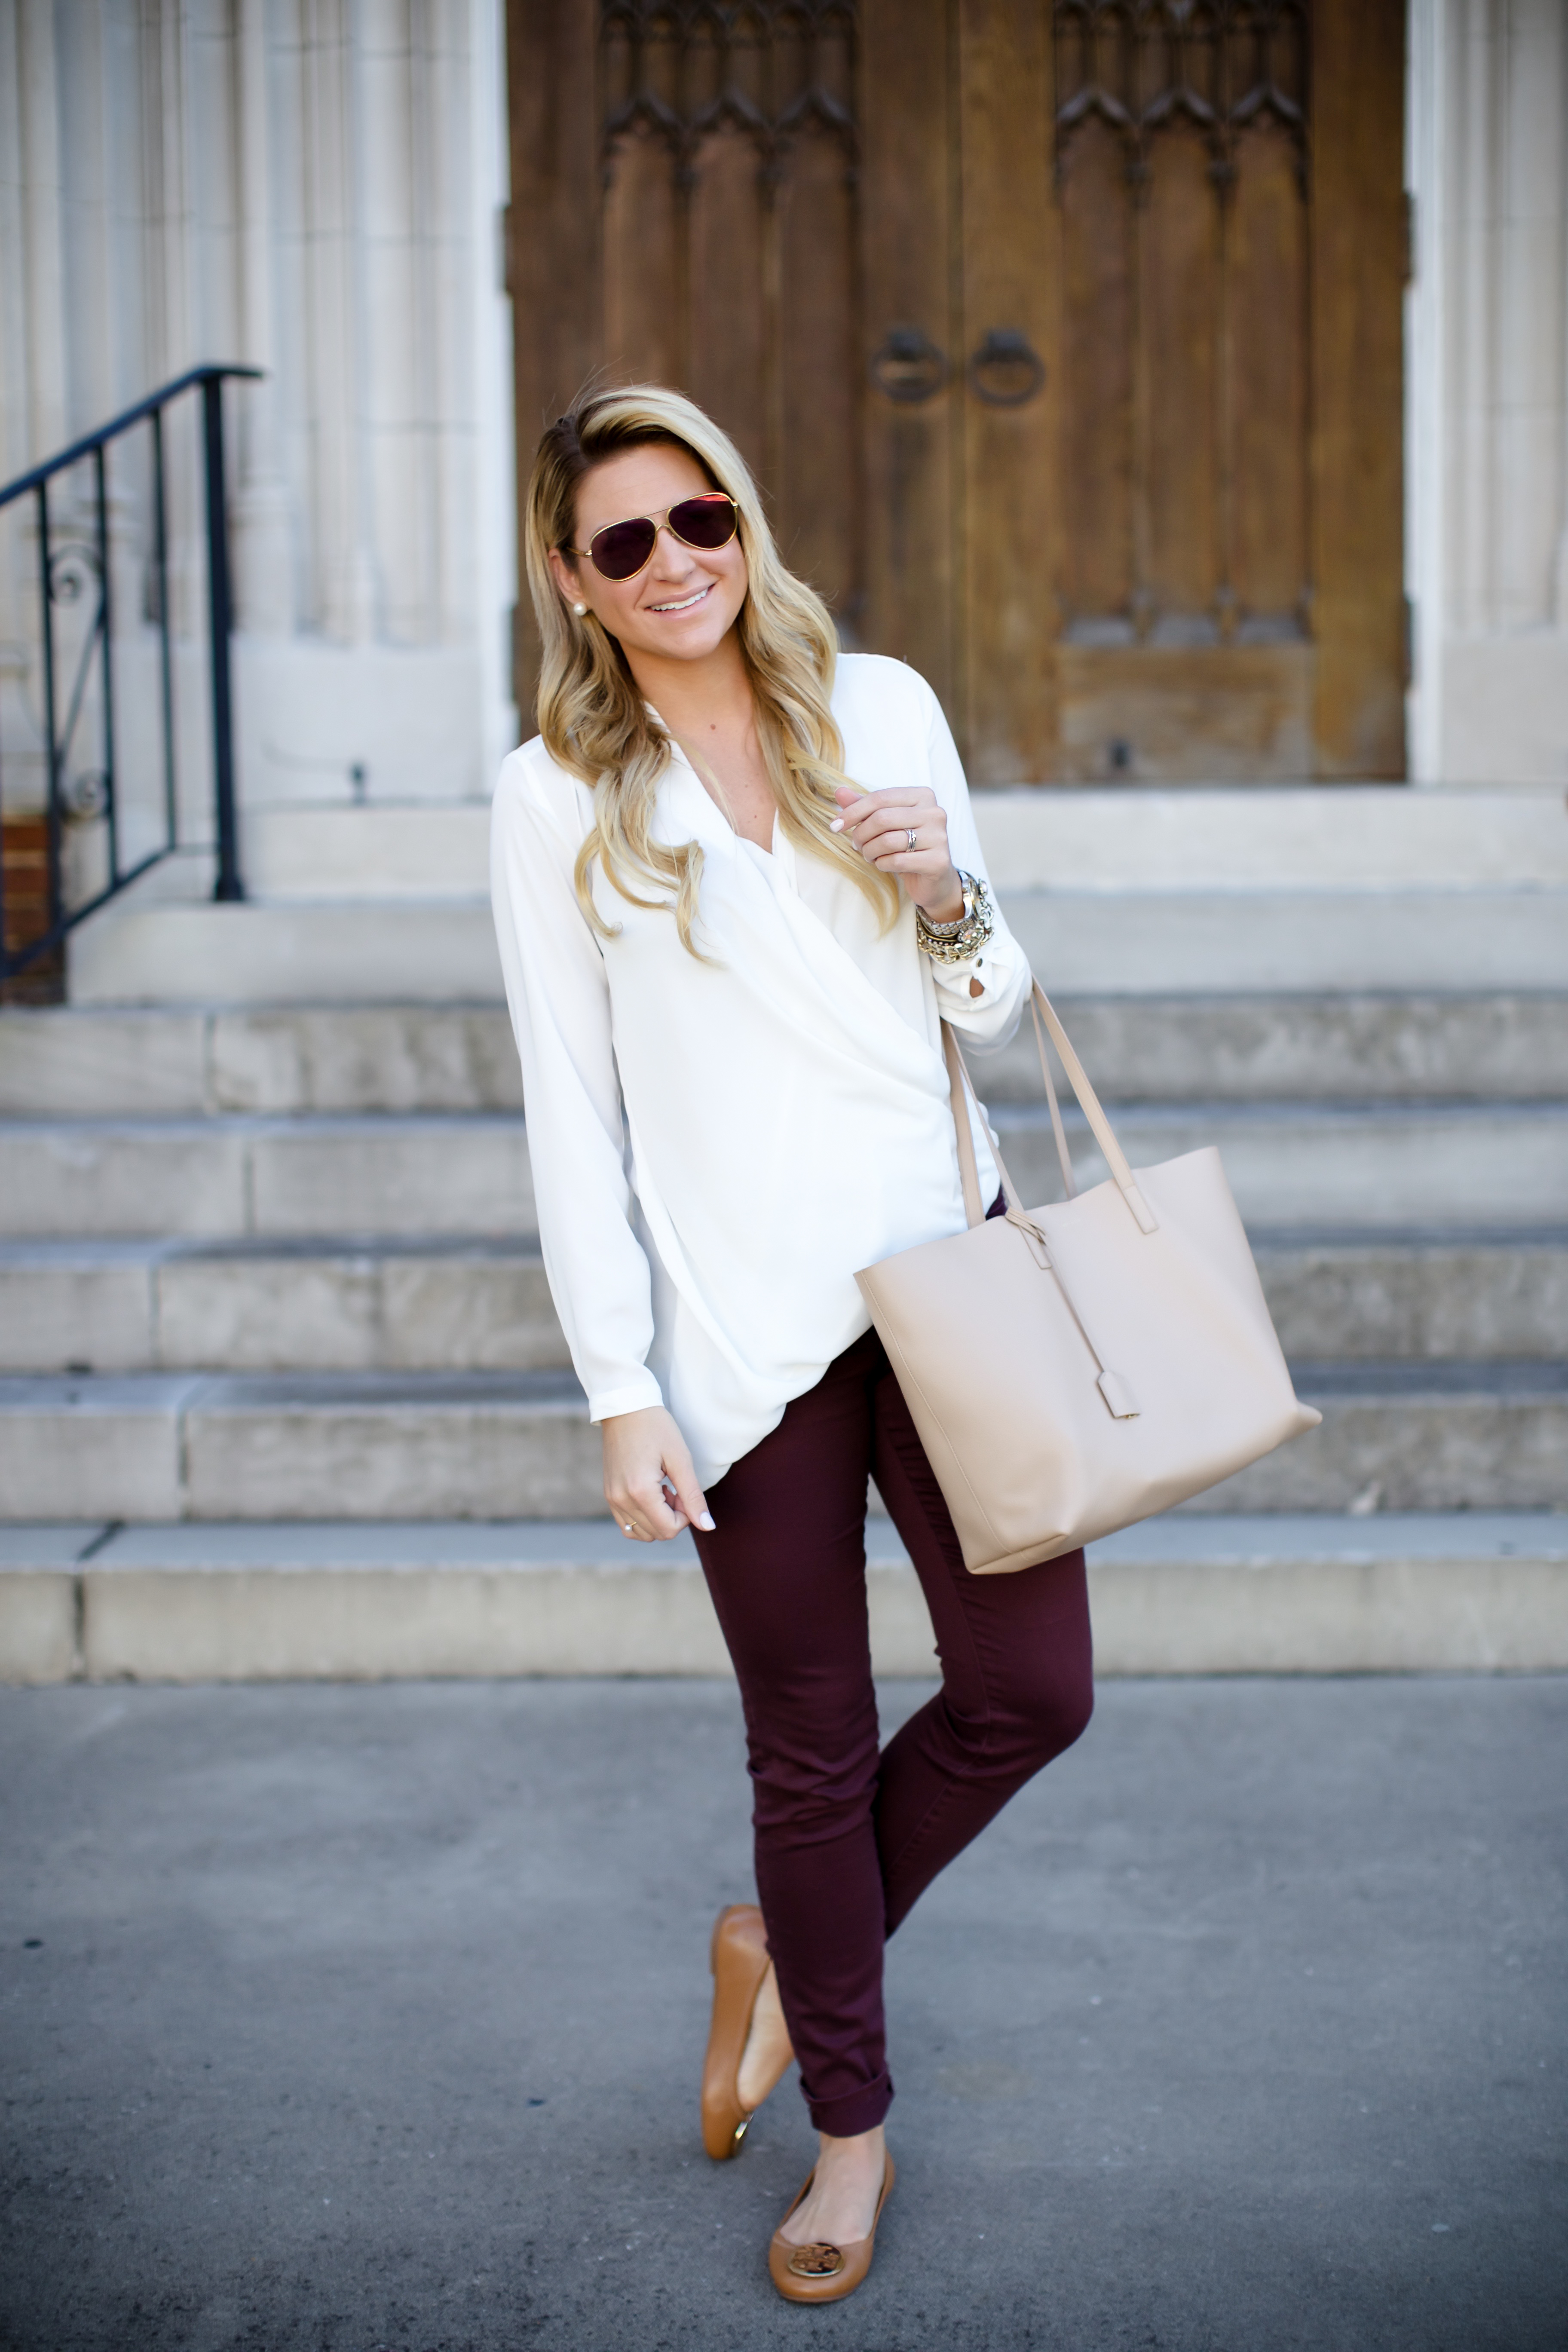 River Island White Top Saint Laurent Tote Tory Burch Reva Wine Jeans-2 - SHOP DANDY | A florida based style and beauty blog Danielle